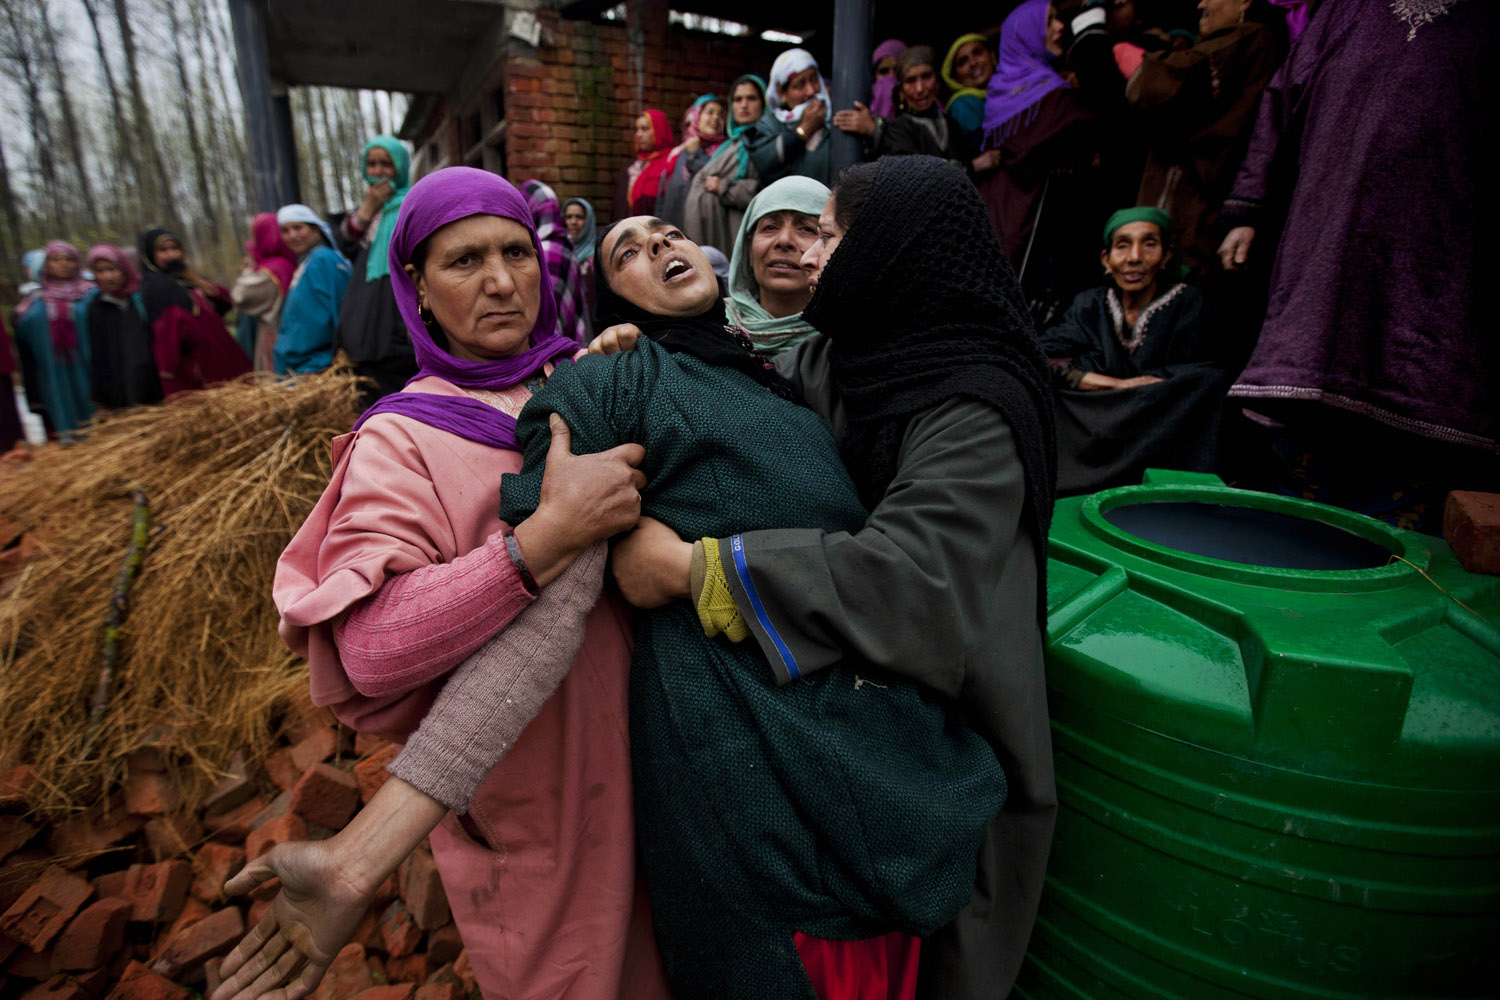 Apr. 18, 2014. Unidentified women try to comfort the wailing relative of Mohammad Amin Pandit, a pro-India party worker and a rural body head, during his funeral procession in Gulzarpora village. Police in Indian Kashmir say unidentified gunmen shot dead the political worker late Thursday night.